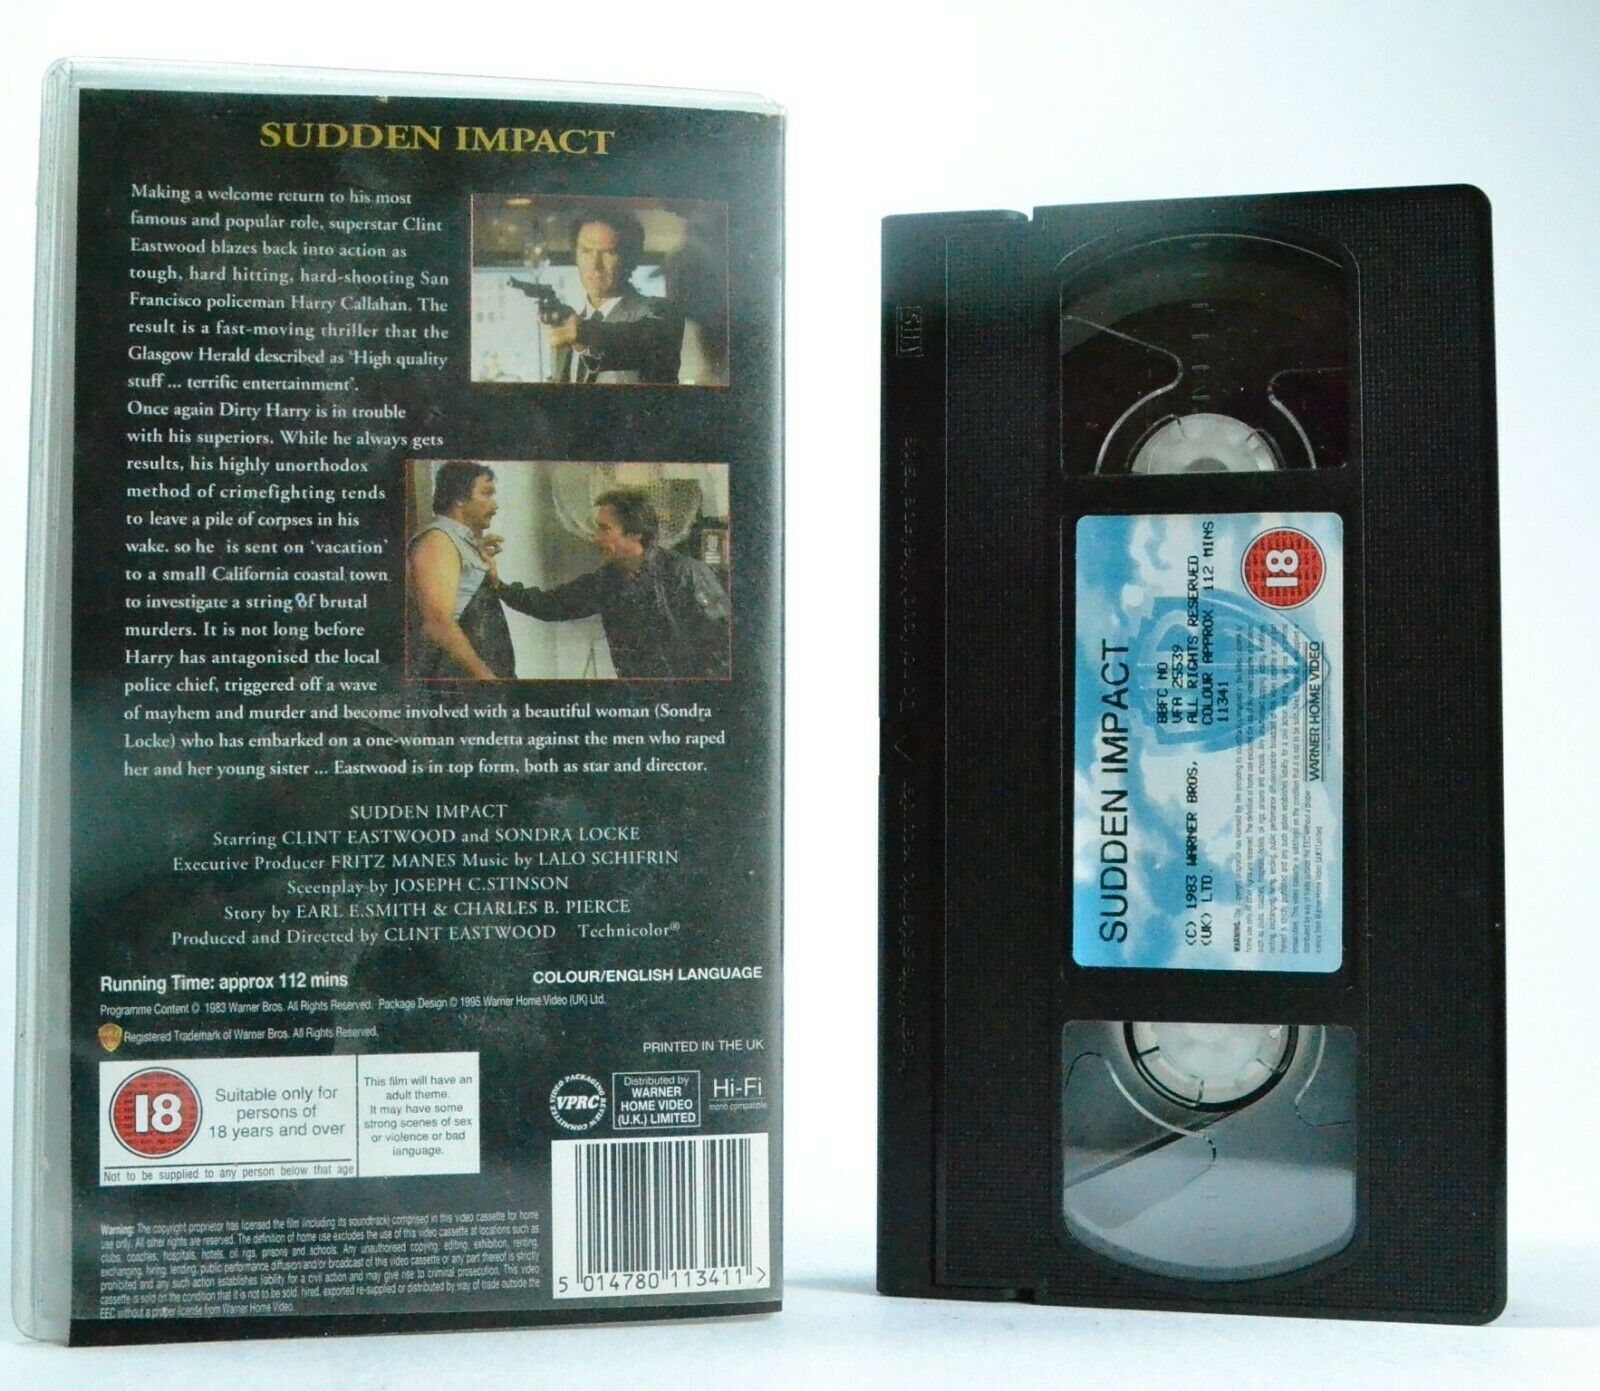 Sudden Impact: 4th Dirty Harry Film - Action Thriller - Clint Eastwood - Pal VHS-